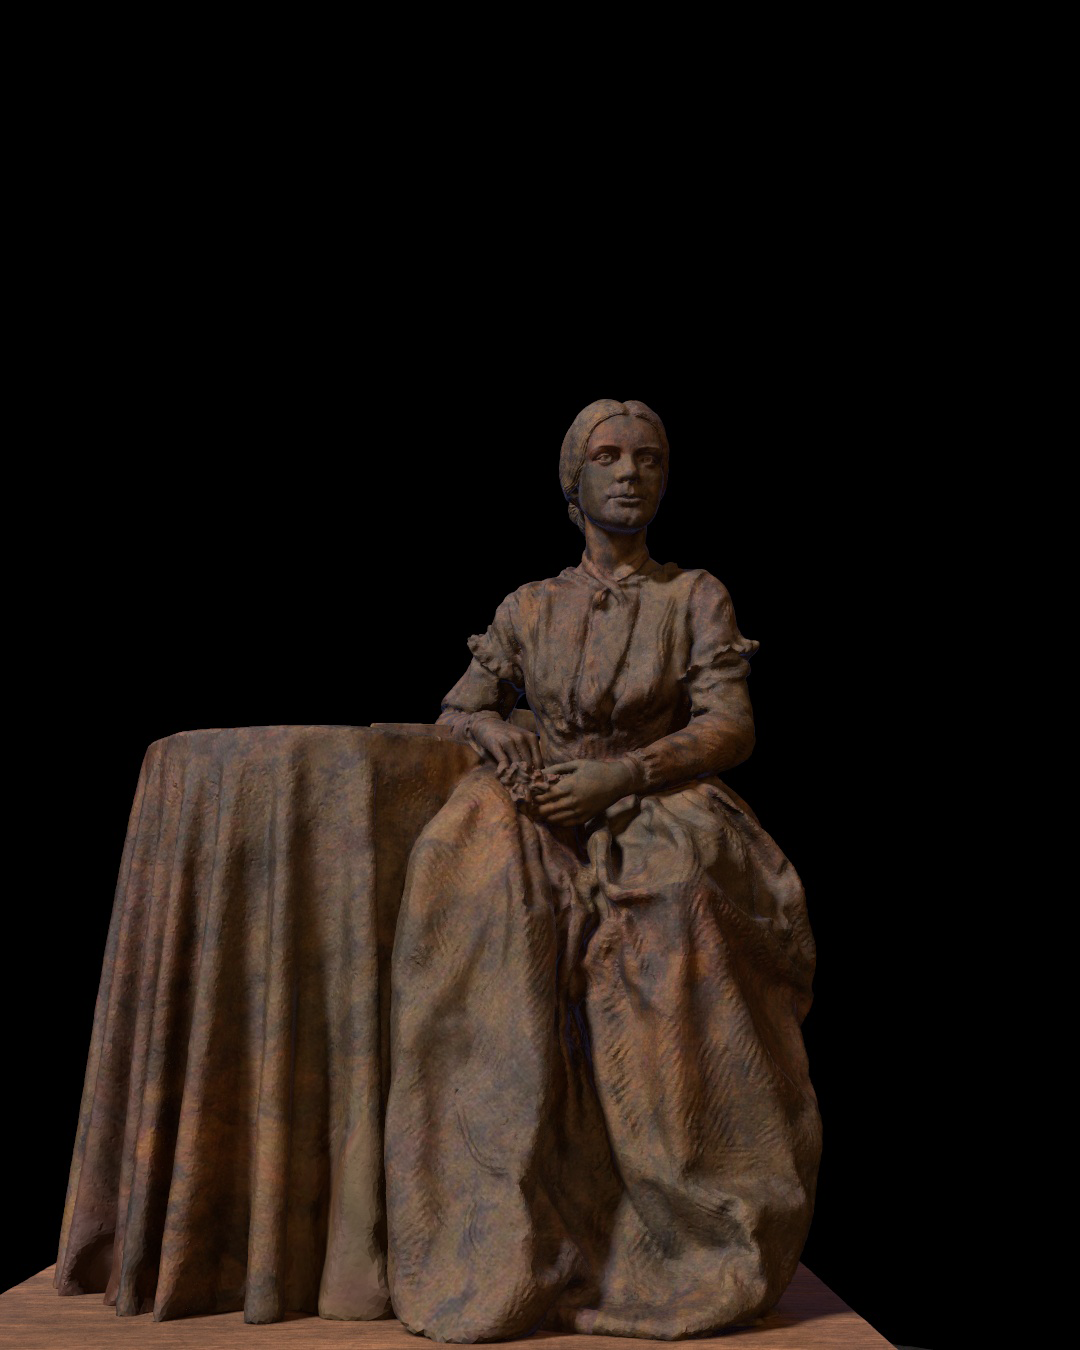 Emily-Dickinson-statue/Rendering-of-Emily-Dickinson-statue-modeled-by-Emil-Sole-9.webp